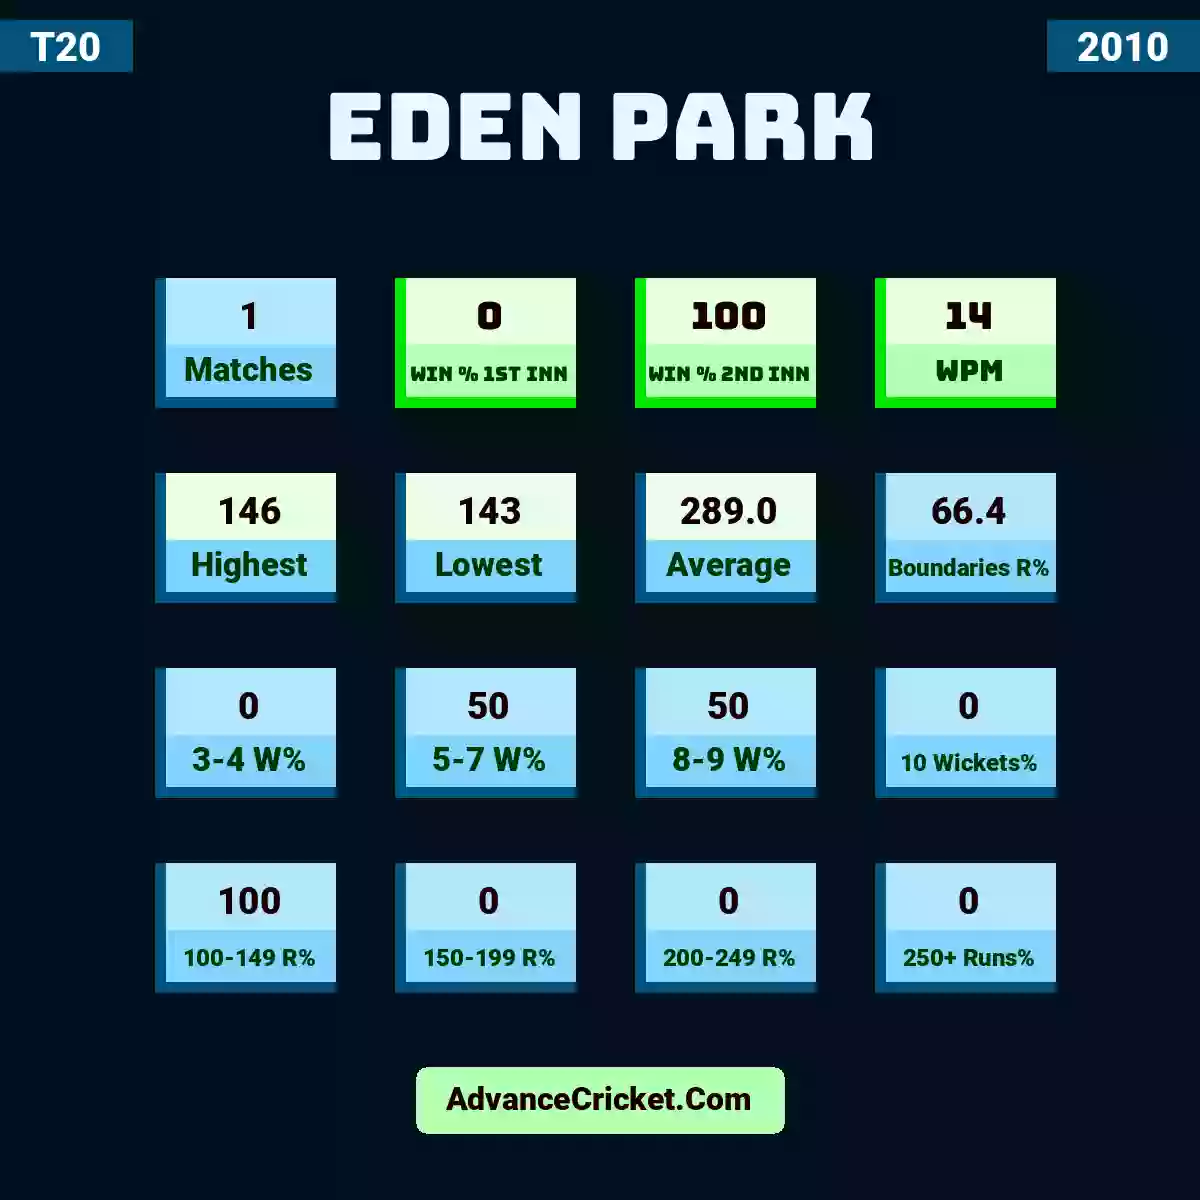 Image showing Eden Park with Matches: 1, Win % 1st Inn: 0, Win % 2nd Inn: 100, WPM: 14, Highest: 146, Lowest: 143, Average: 289.0, Boundaries R%: 66.4, 3-4 W%: 0, 5-7 W%: 50, 8-9 W%: 50, 10 Wickets%: 0, 100-149 R%: 100, 150-199 R%: 0, 200-249 R%: 0, 250+ Runs%: 0.